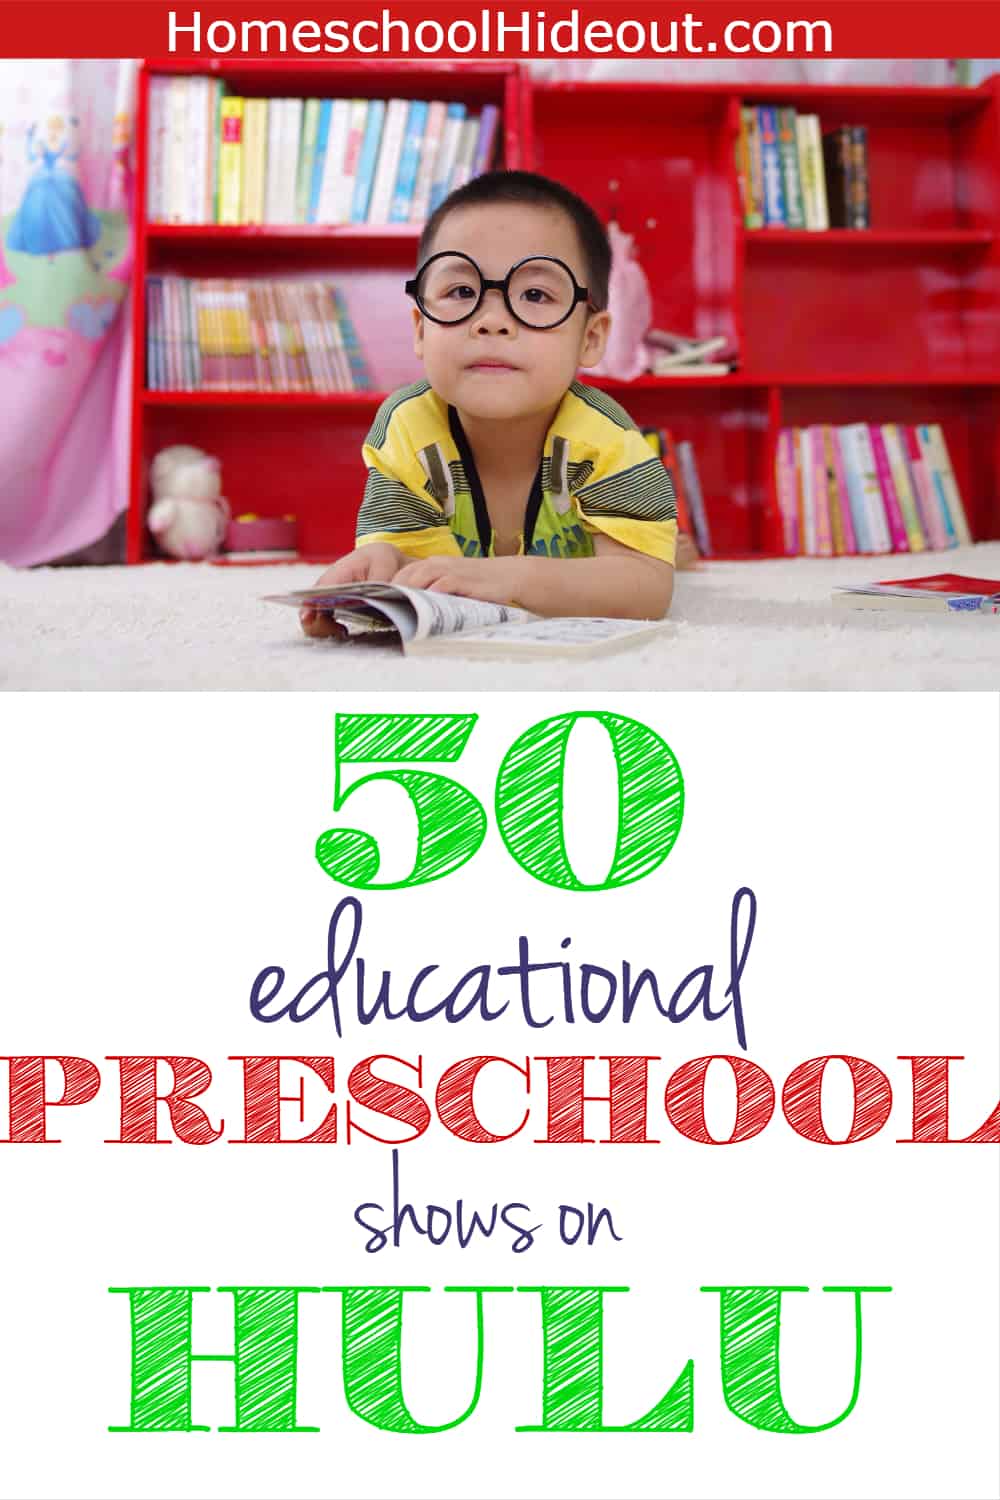 This list of 50 educational preschool shows on Hulu is the BEST I've seen! I'm adding these to my watch list to make my life a little easier. #learningathome #preschool #prek #homeschool #totschooling